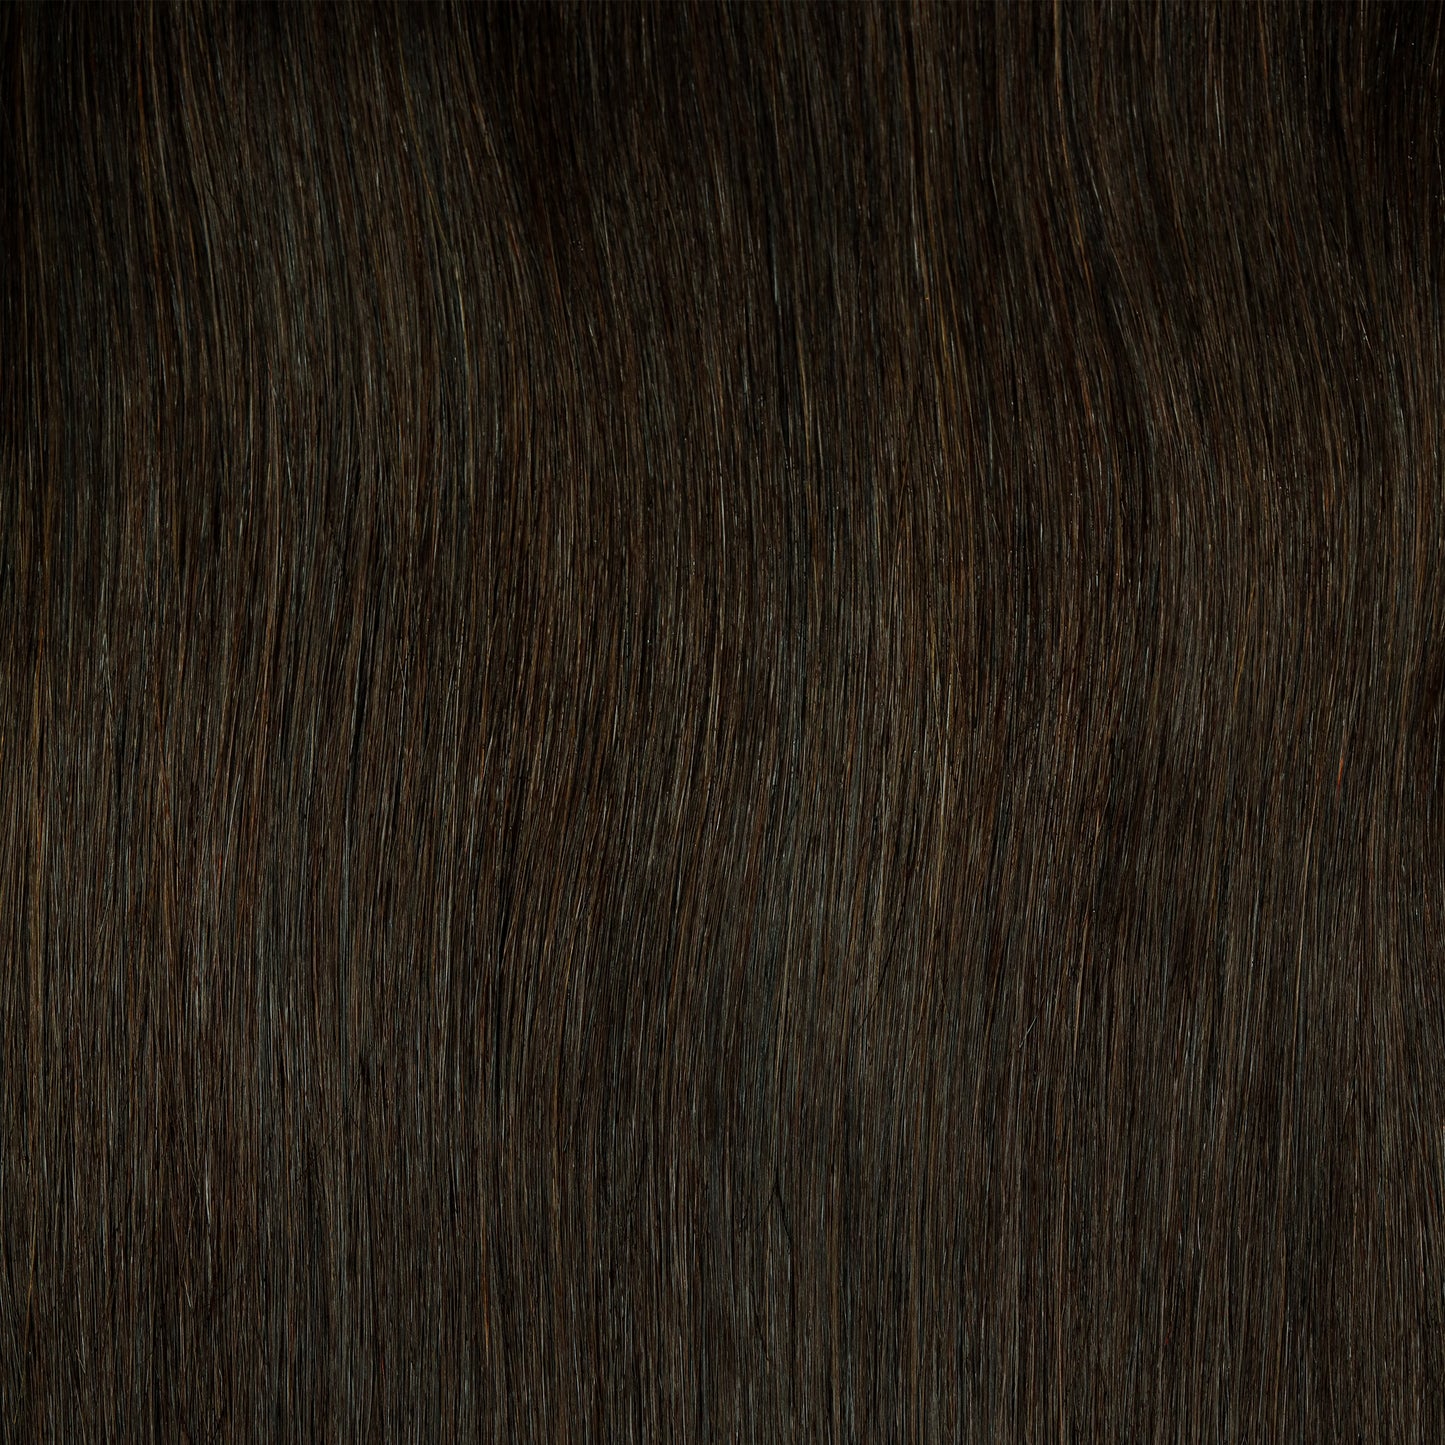 16" Sublime Clip-In Hair Extensions Dark Brown